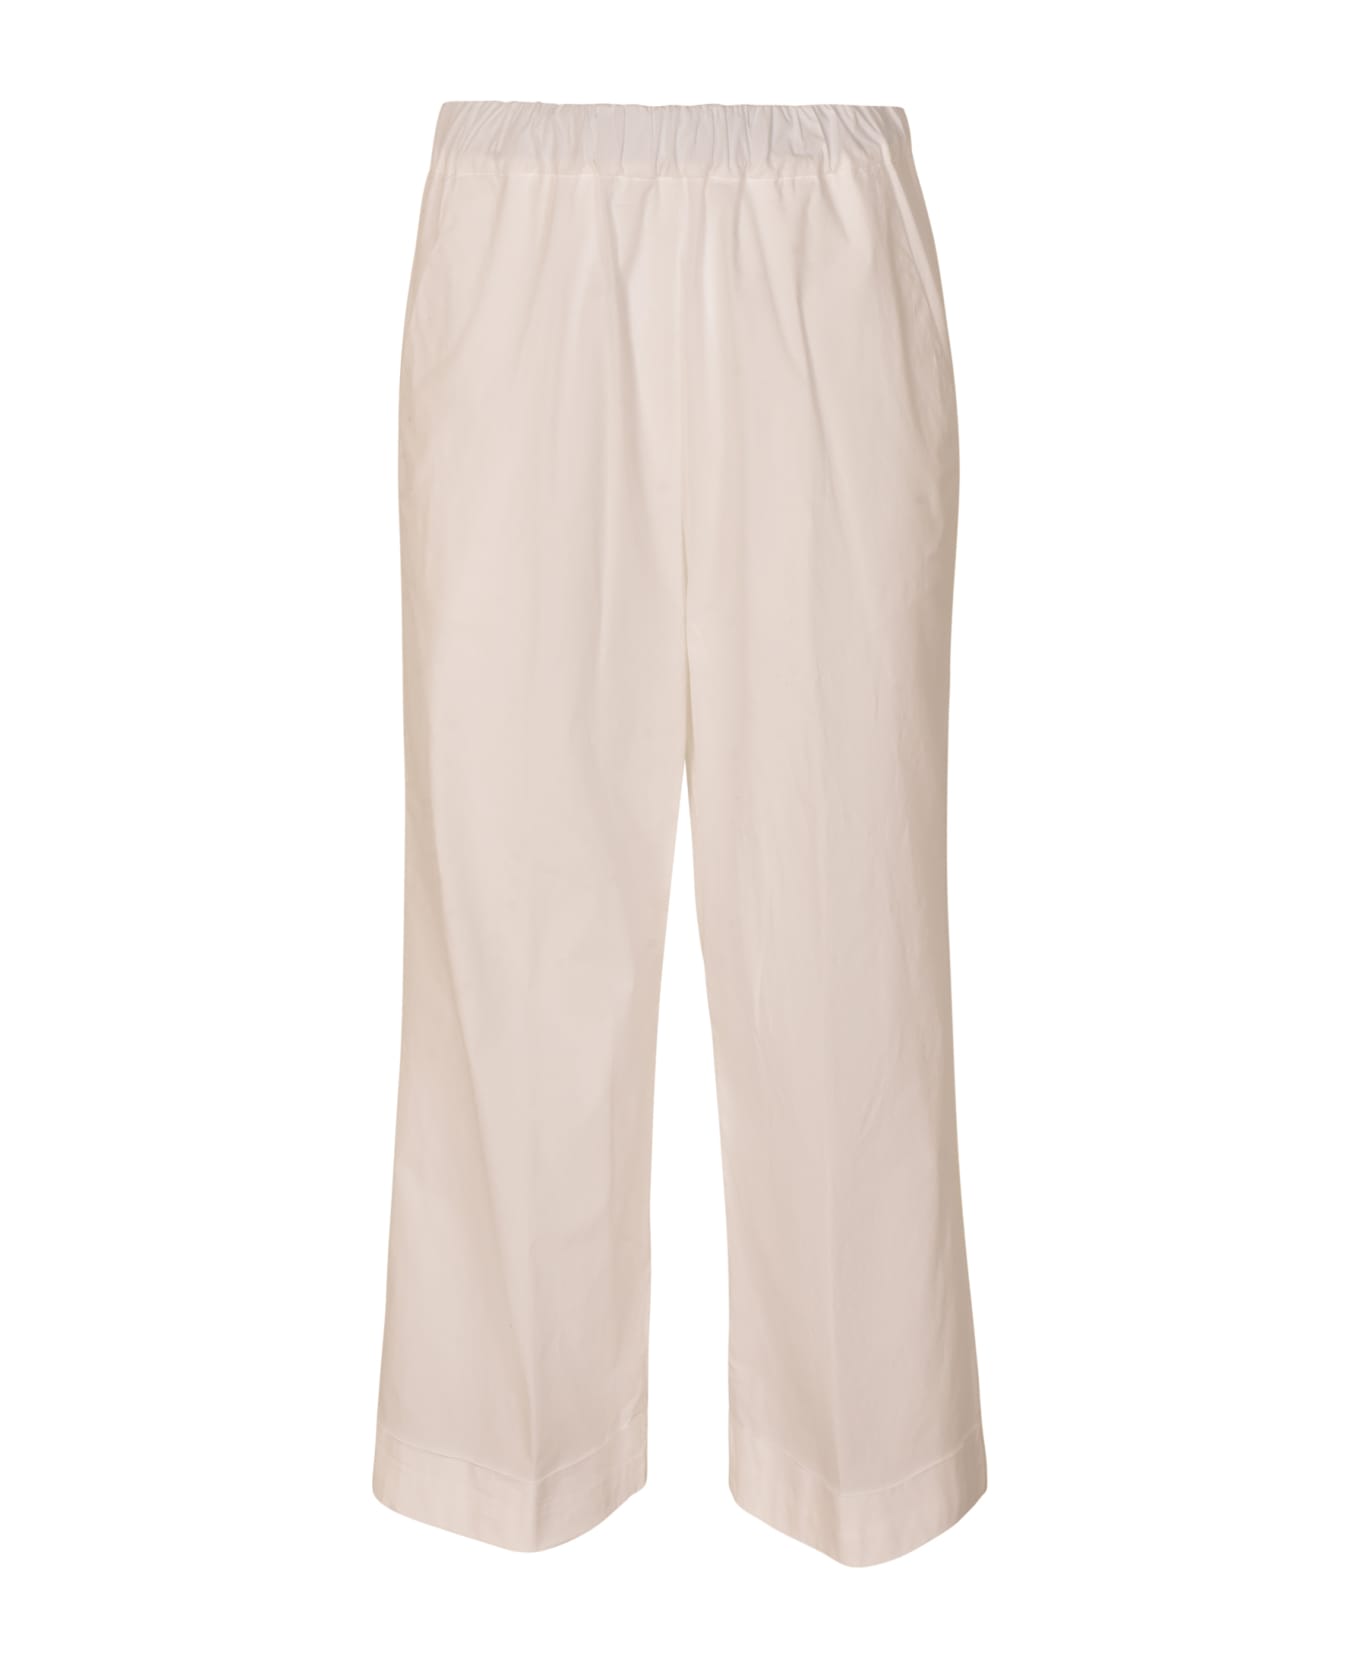 Kiltie Ribbed Waist Trousers - White ボトムス